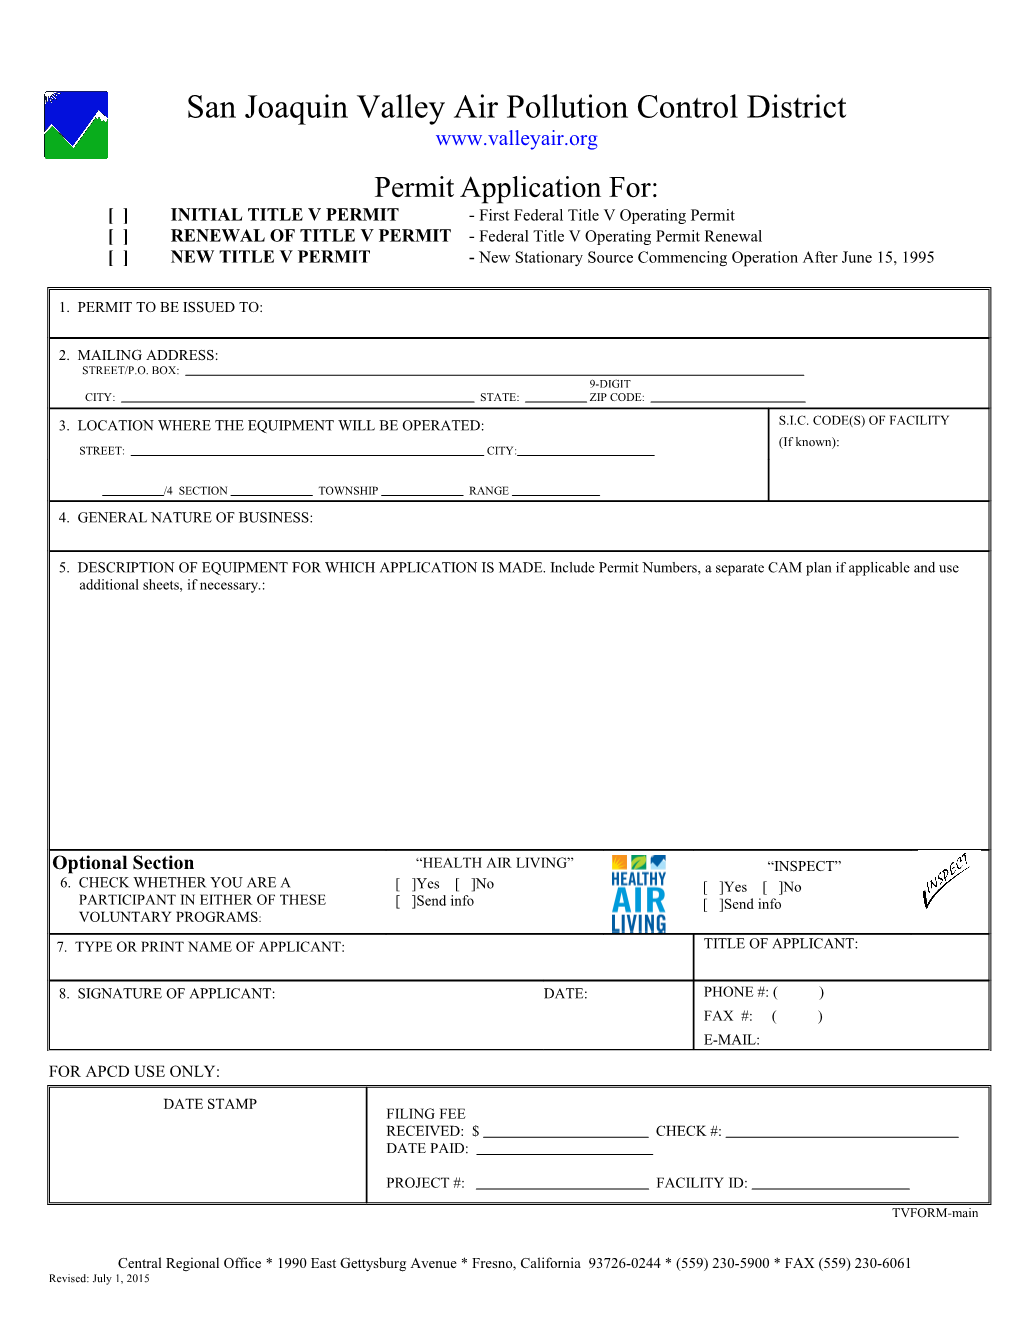 Application Form for Initial, Renewal, Or New TV Permit